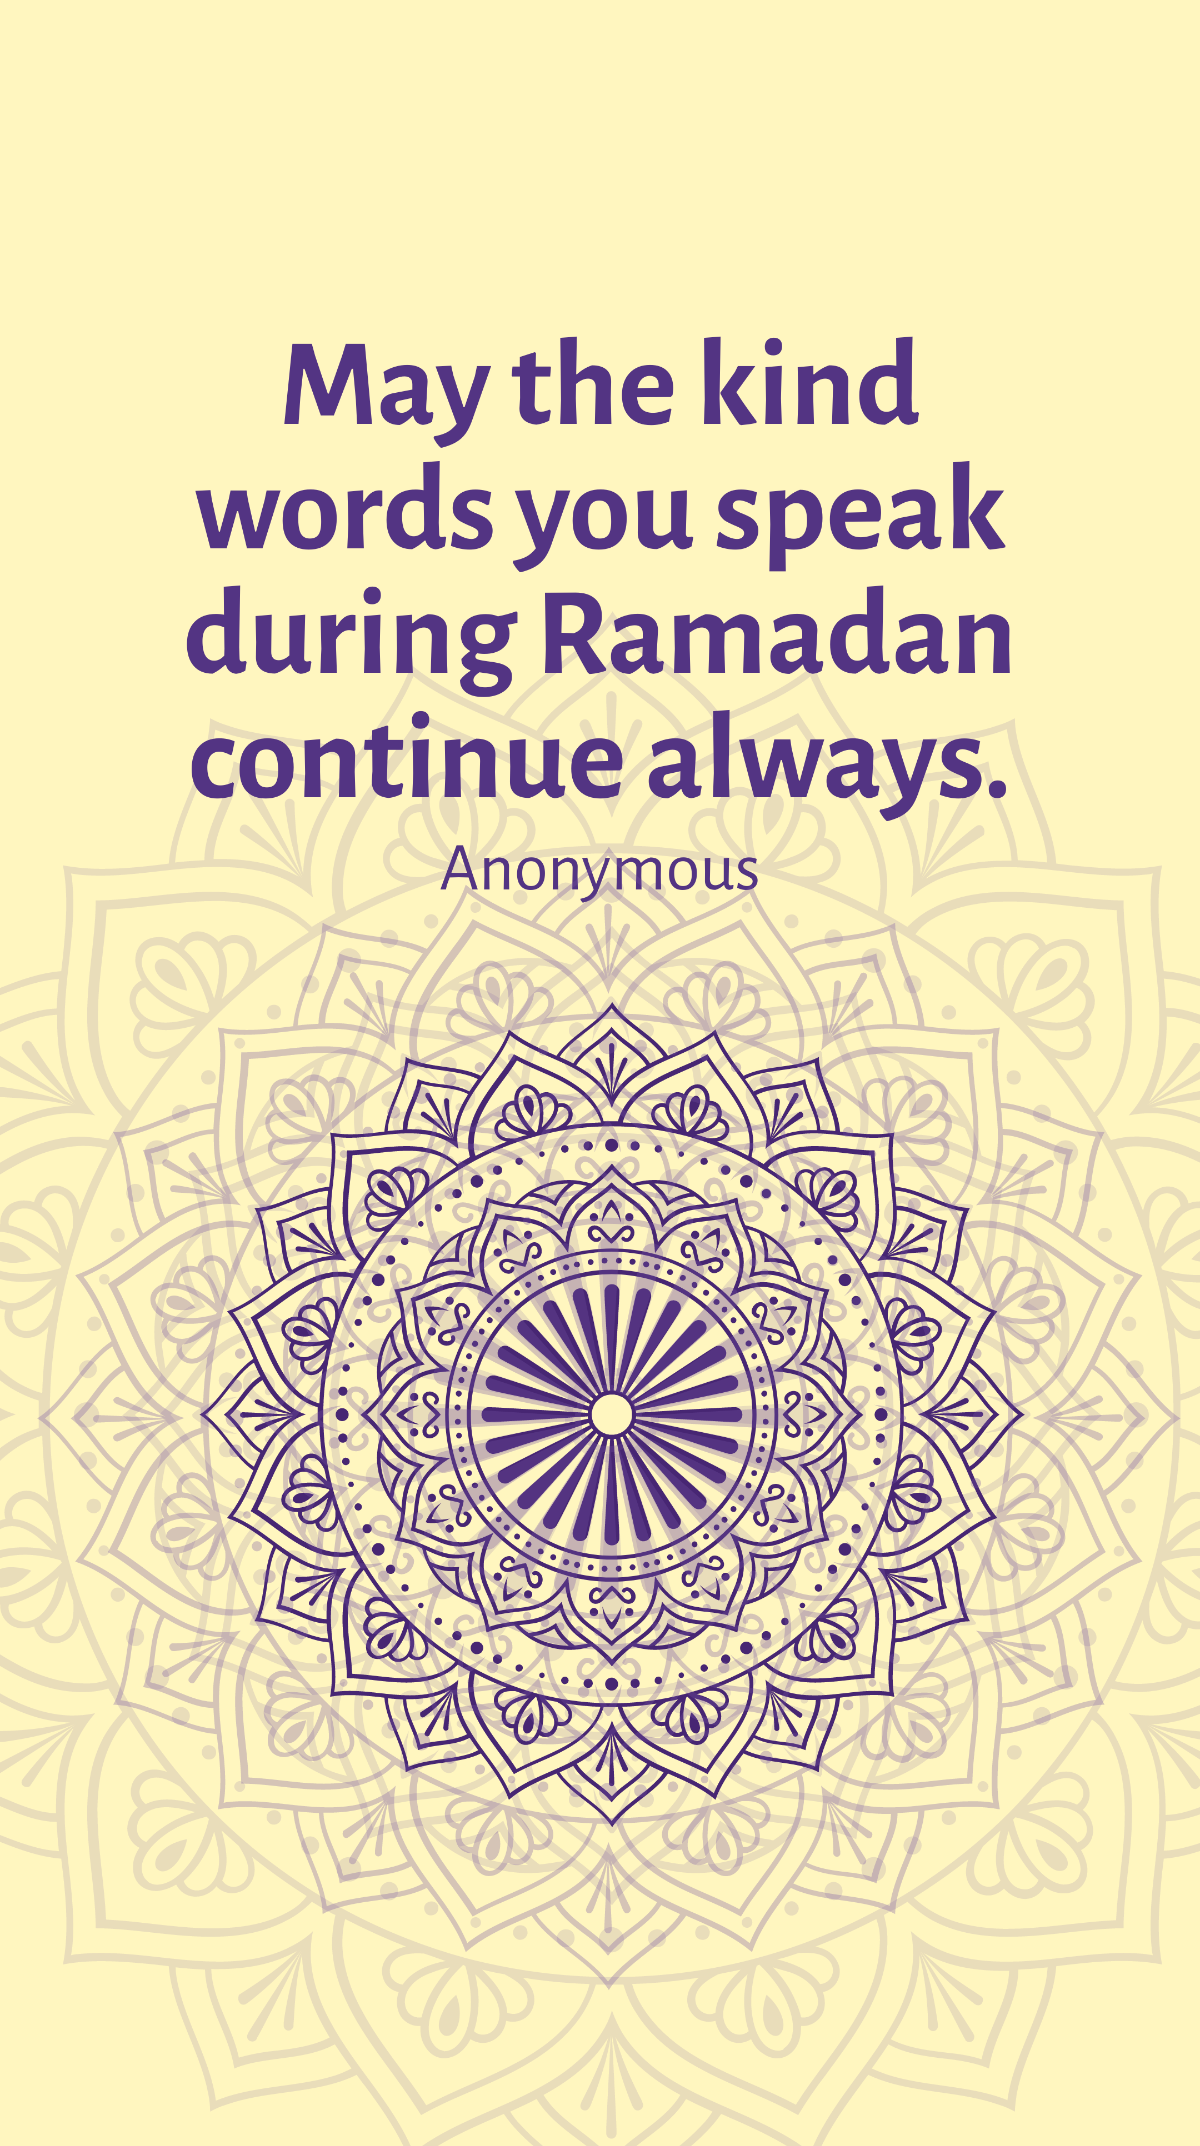 Anonymous - May the kind words you speak during Ramadan continue always. Template